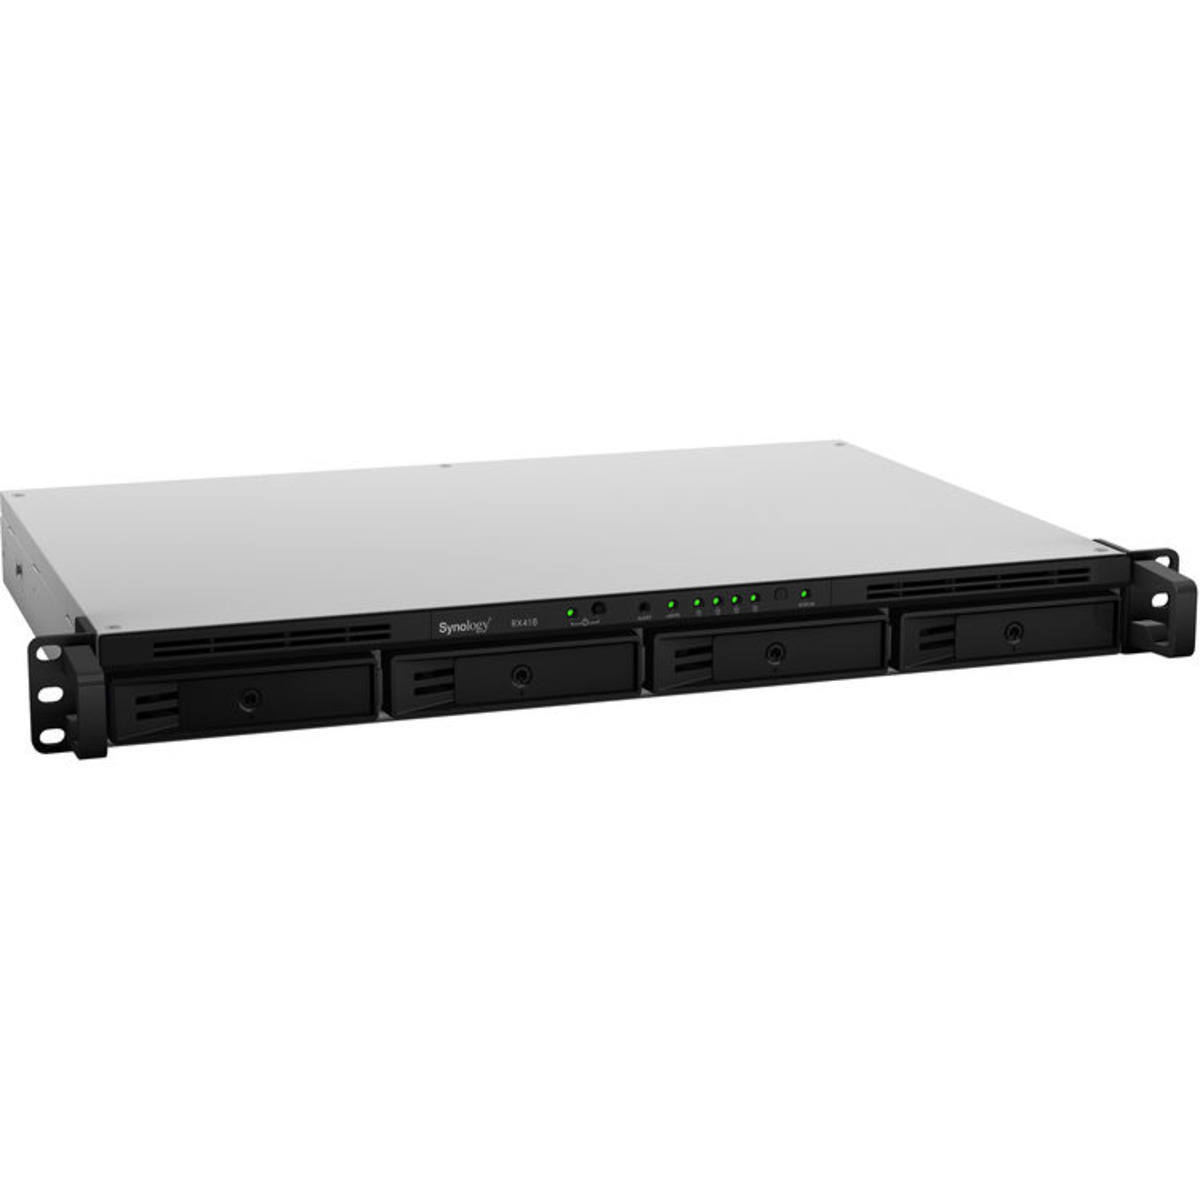 Synology RX418 External Expansion Drive 30tb 4-Bay RackMount Multimedia / Power User / Business Expansion Enclosure 3x10tb Western Digital Red Plus WD101EFBX 3.5 7200rpm SATA 6Gb/s HDD NAS Class Drives Installed - Burn-In Tested RX418 External Expansion Drive